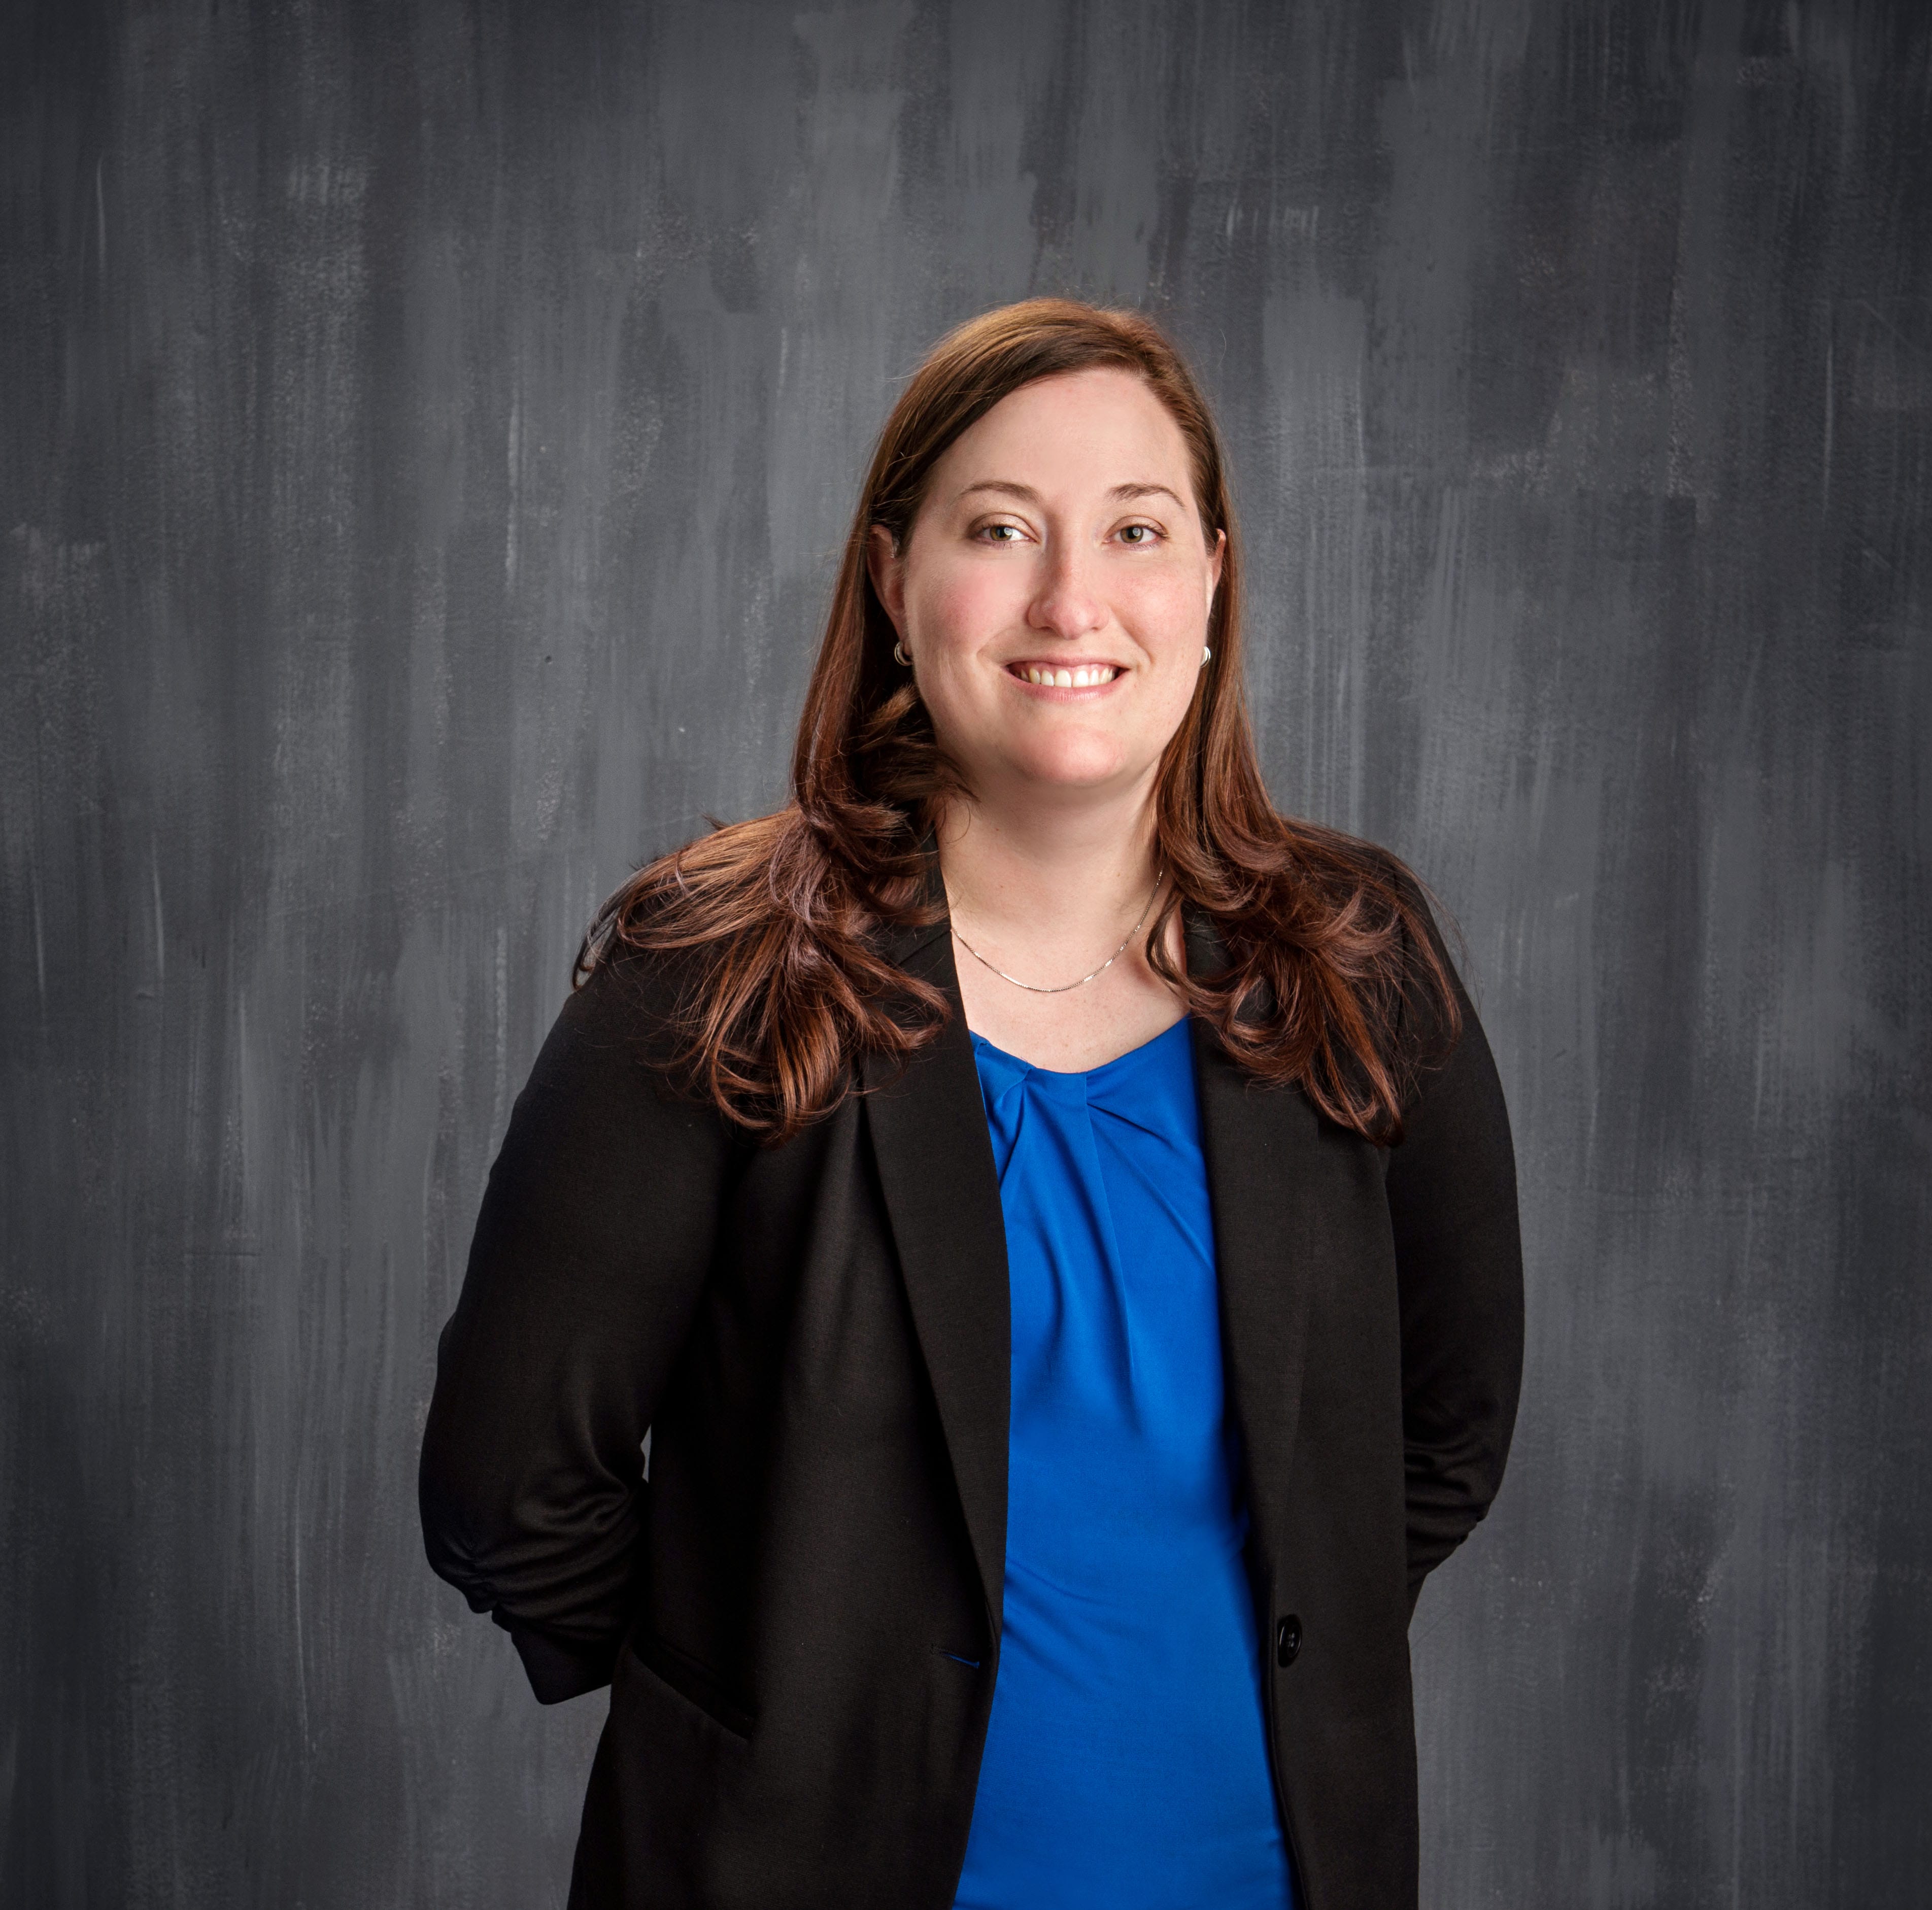 Picture of board member Stephanie Enders. She is smiling and wearing a blue shirt with black blazer, her hair is past her shoulders and an auburn brown.